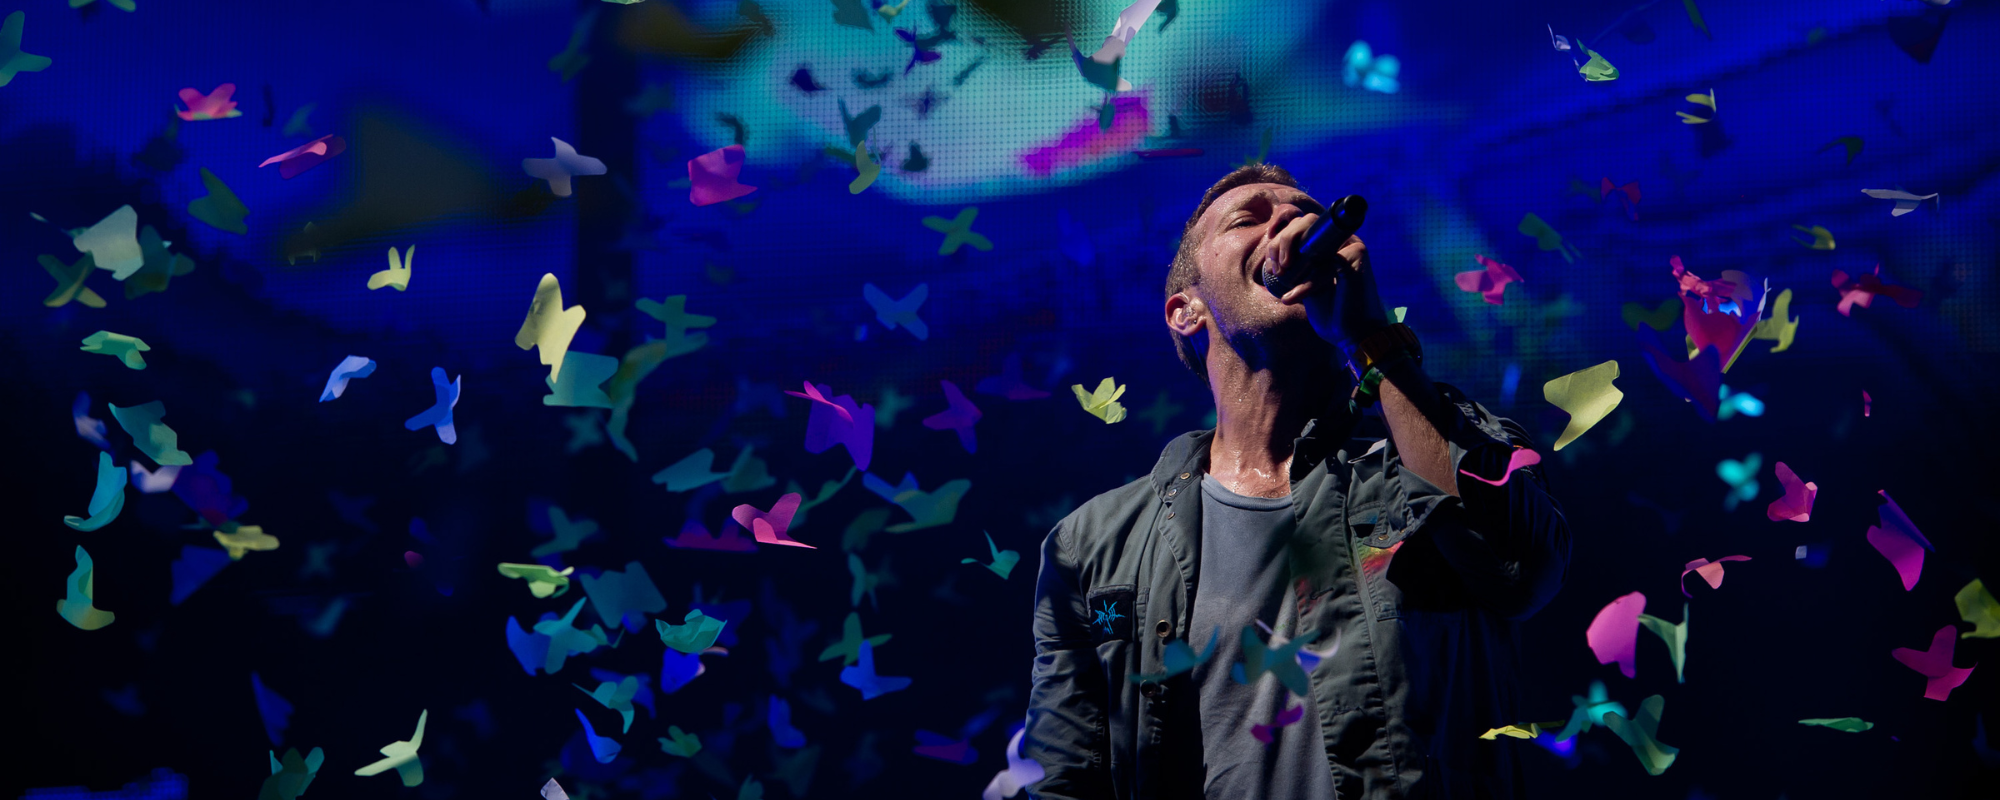 So…Does Chris Martin WANT to Be in a Tumultuous Relationship? The Meaning Behind “Clocks” by Coldplay